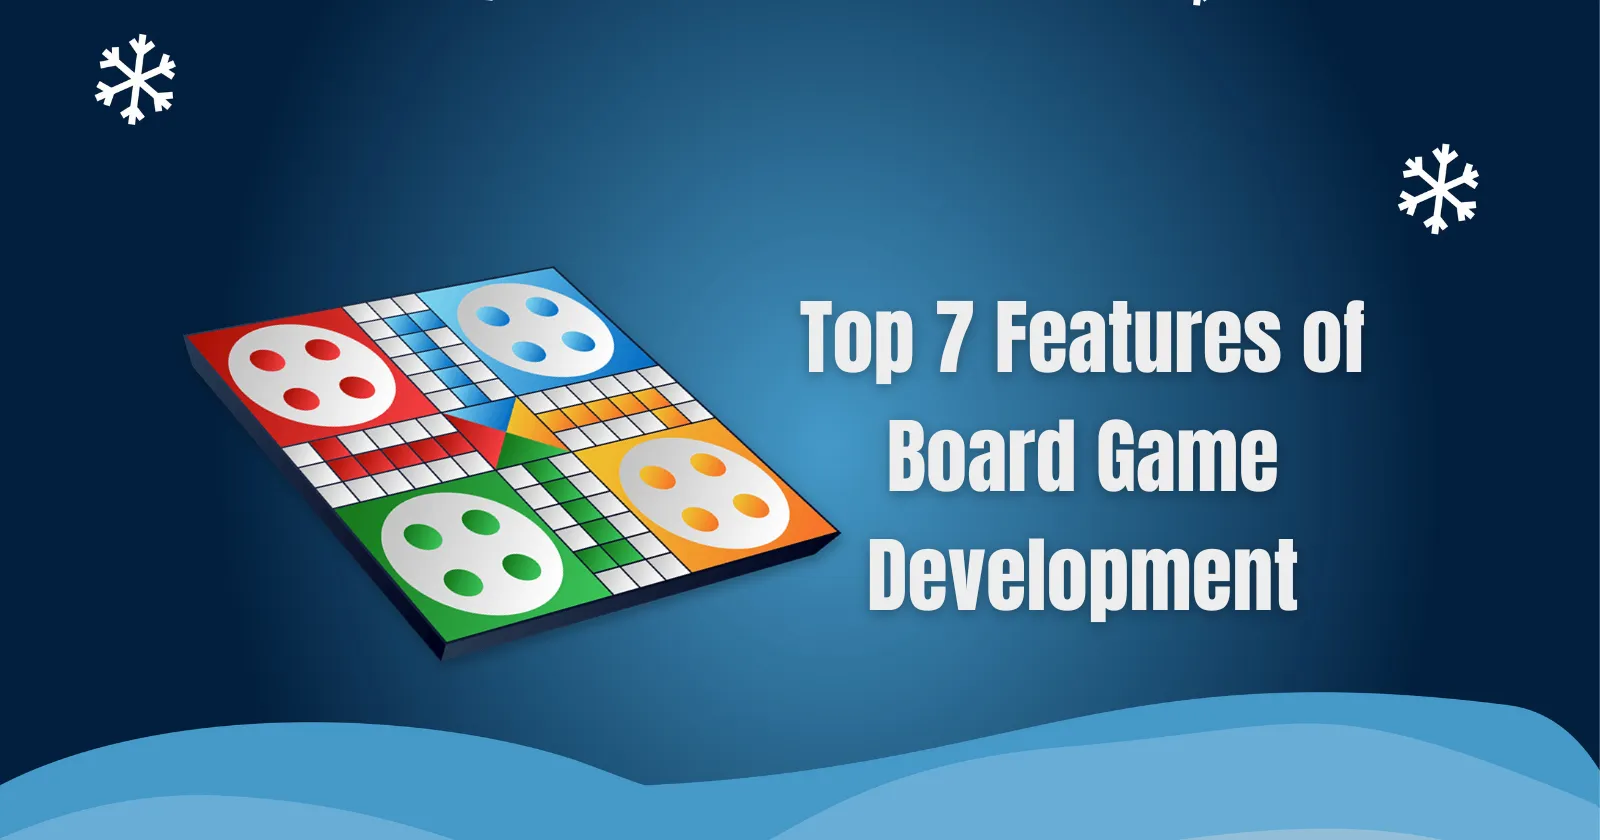 Top 7 Features of Board Game Development